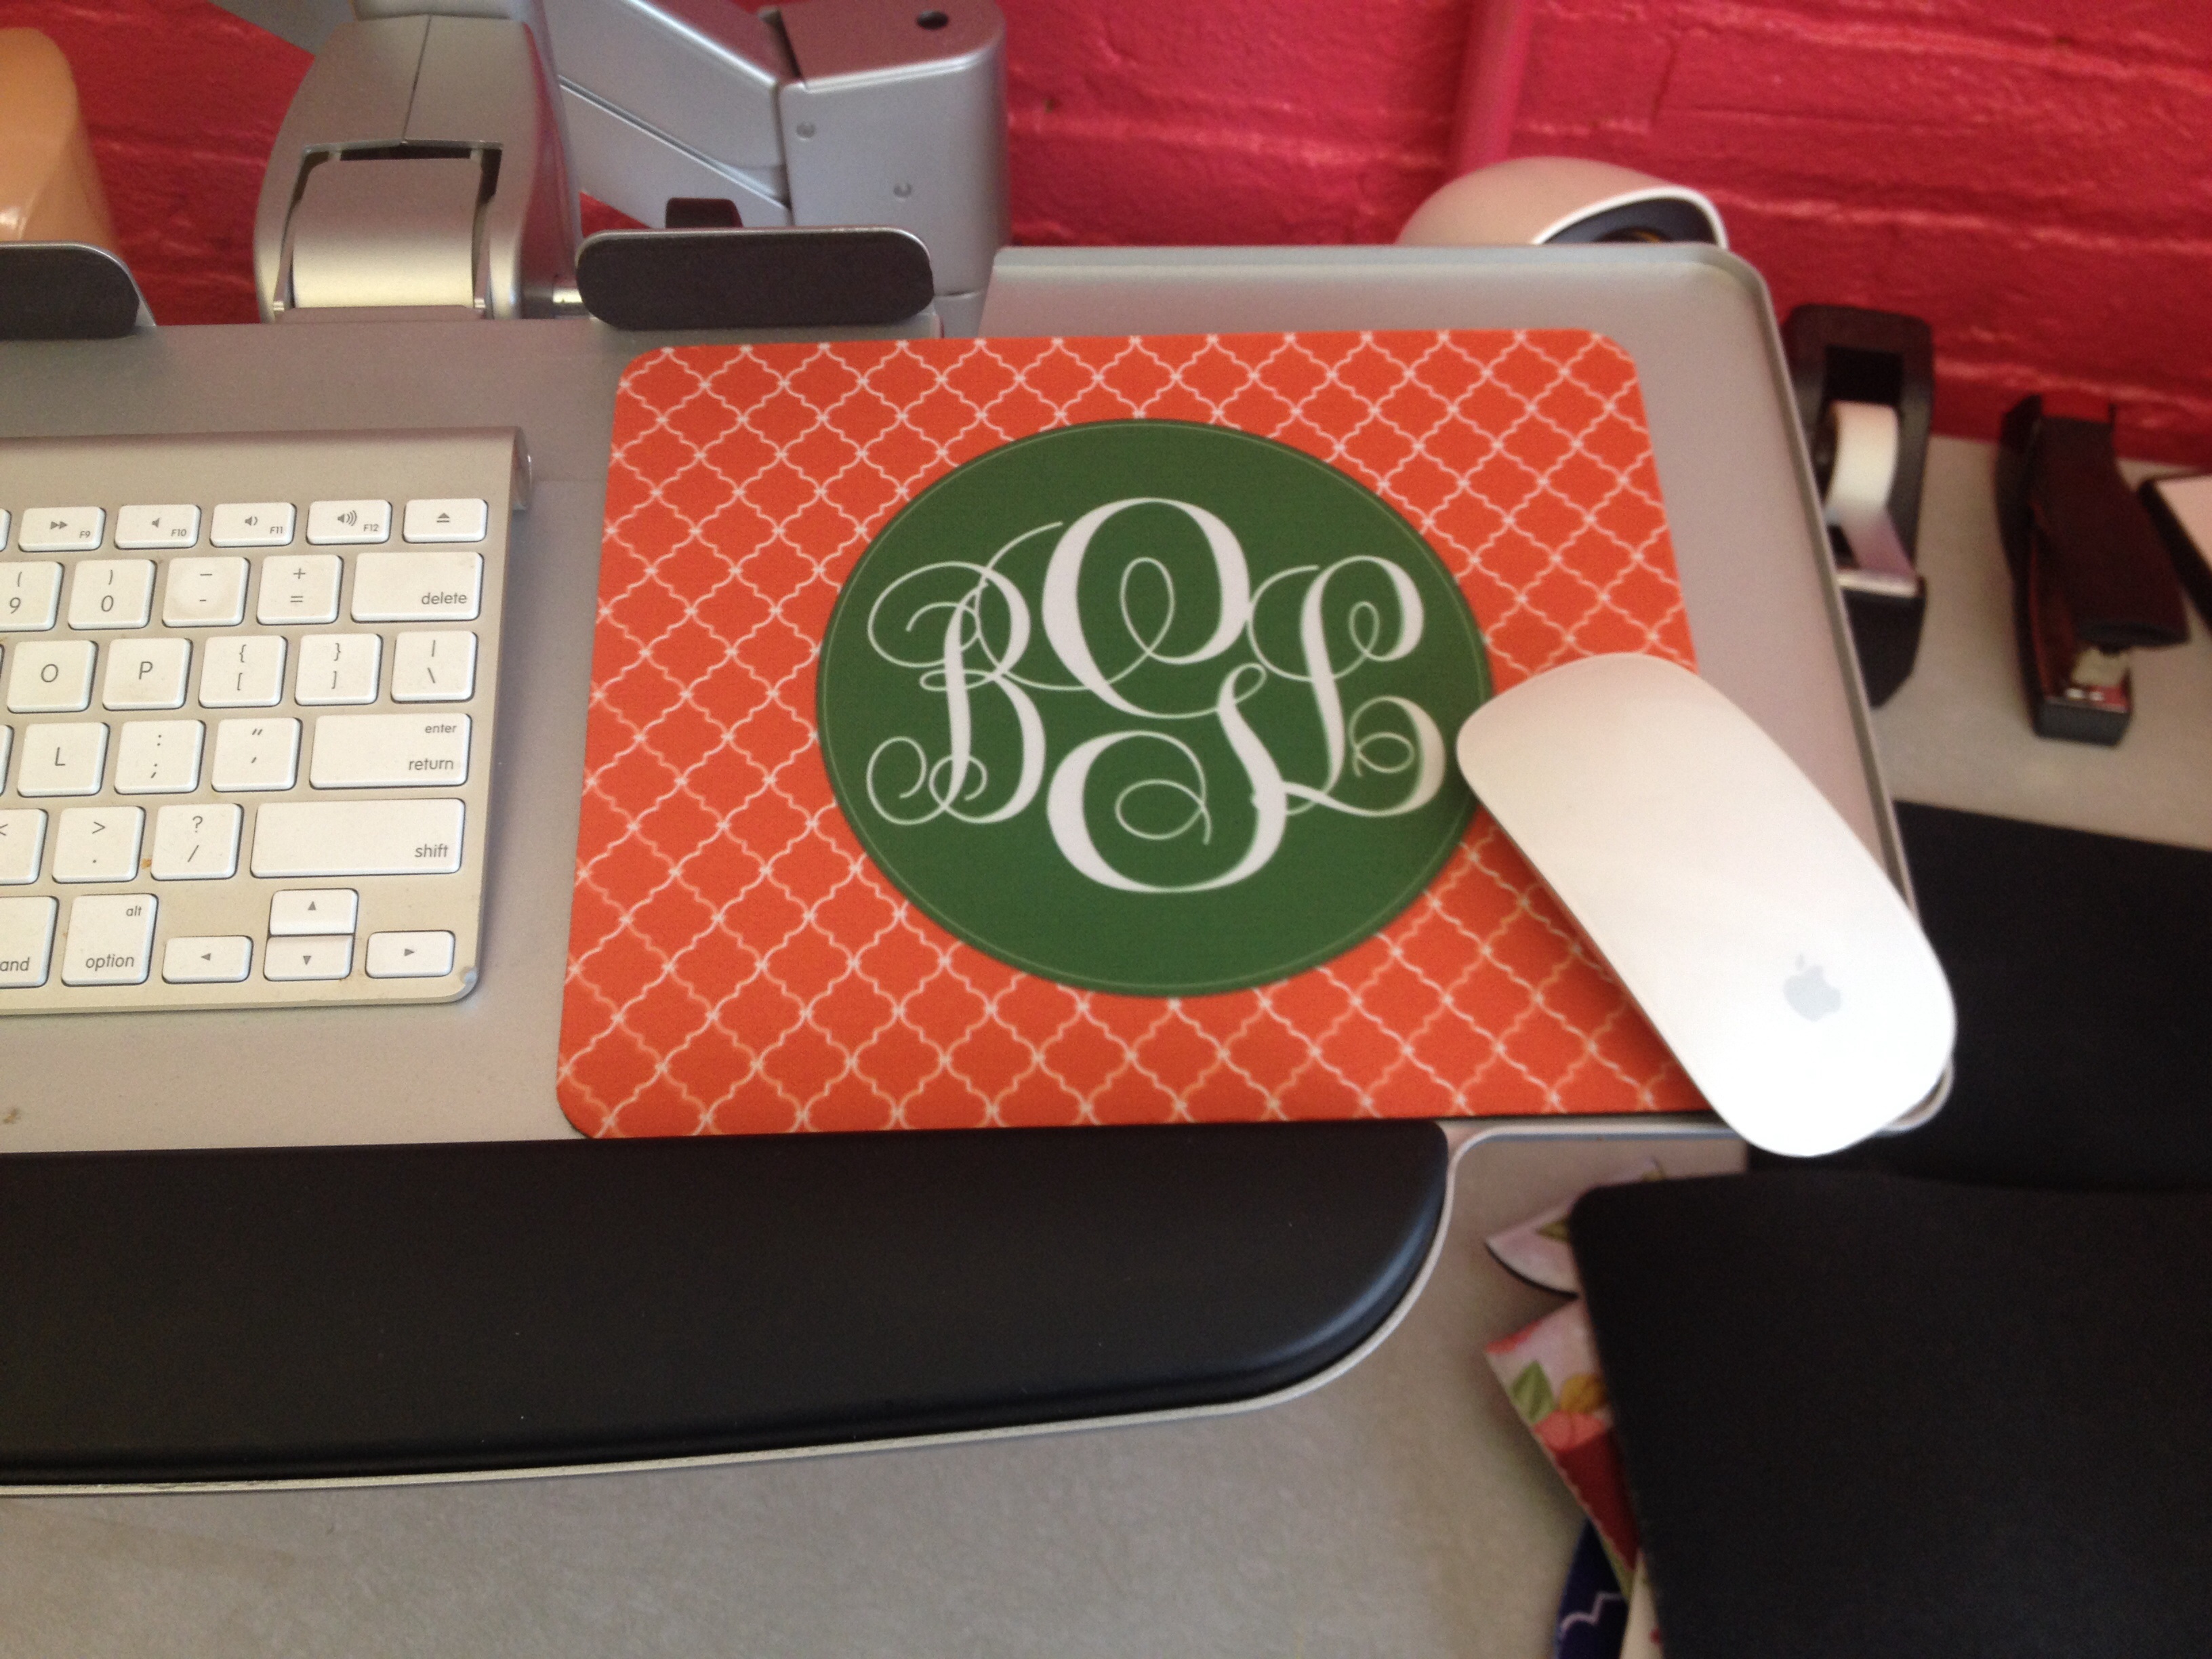 Mousepads made with sublimation printing